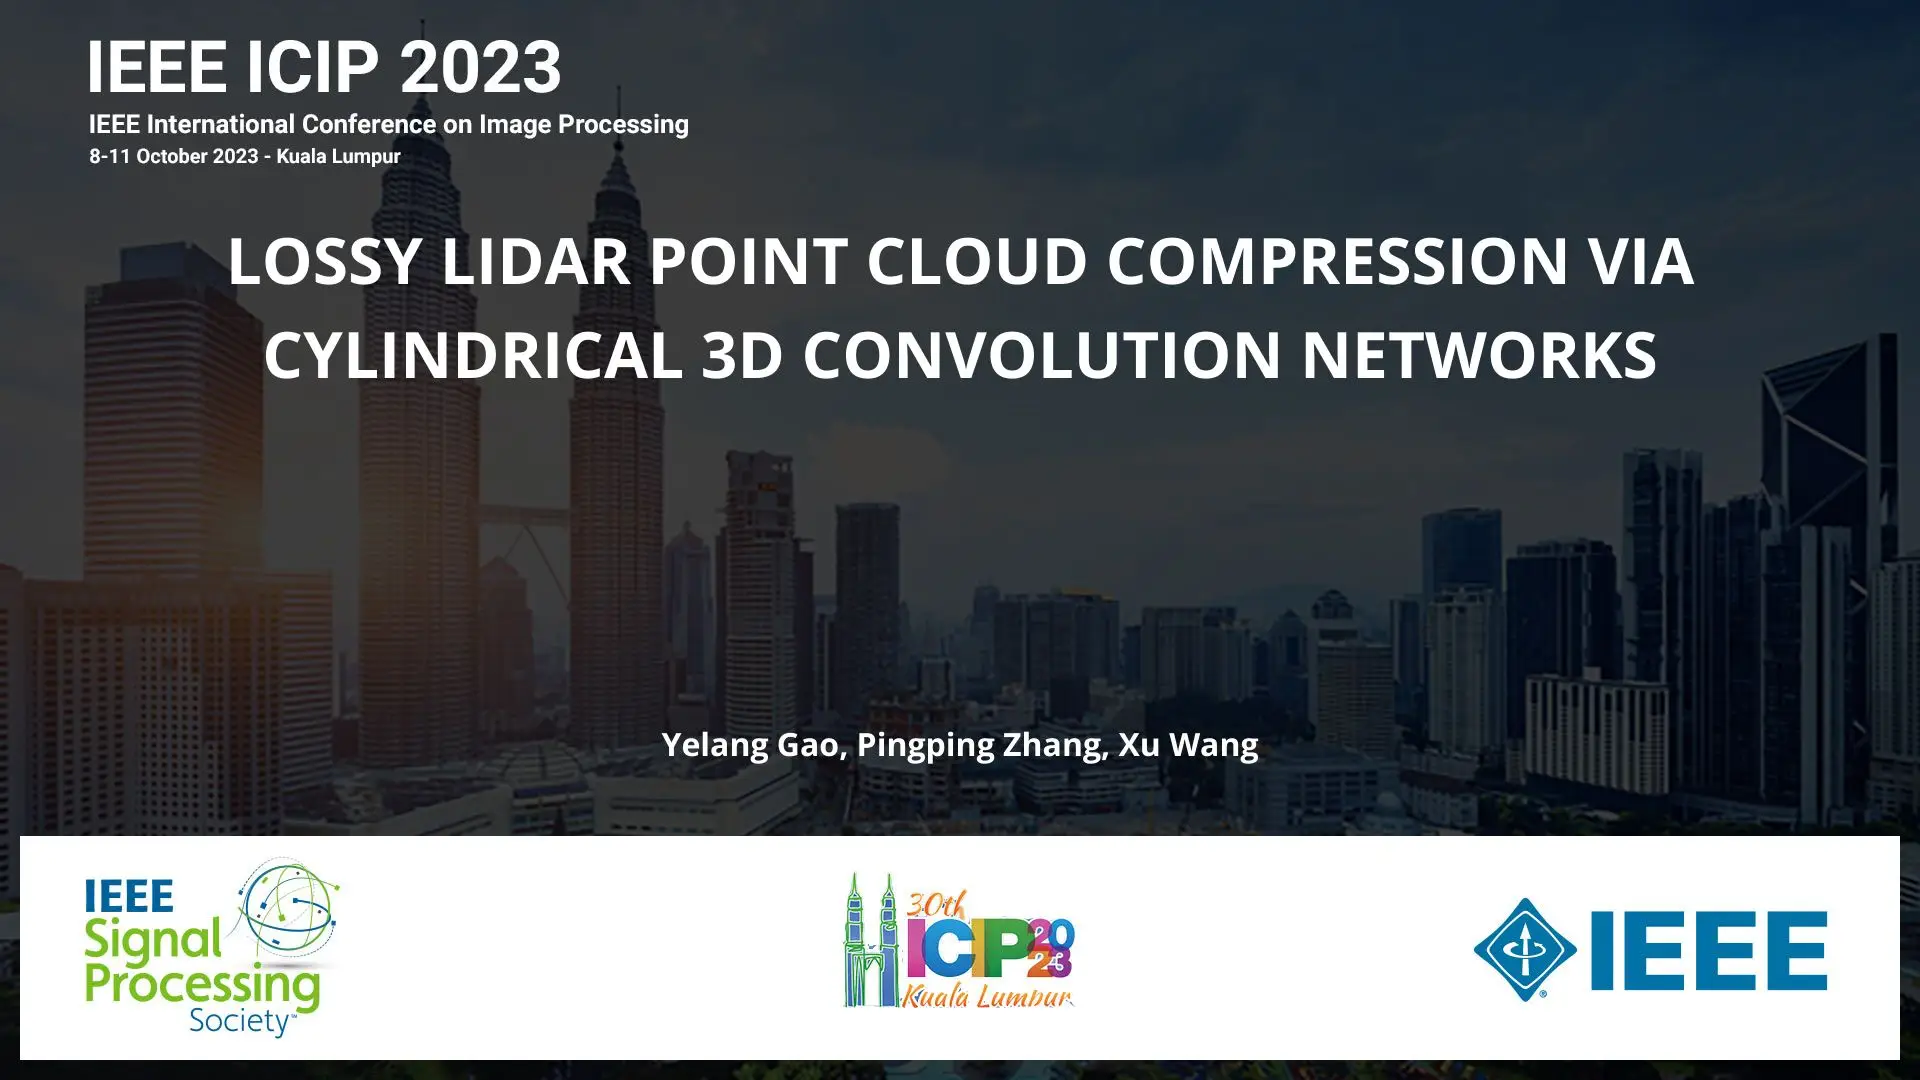 LOSSY LIDAR POINT CLOUD COMPRESSION VIA CYLINDRICAL 3D CONVOLUTION NETWORKS